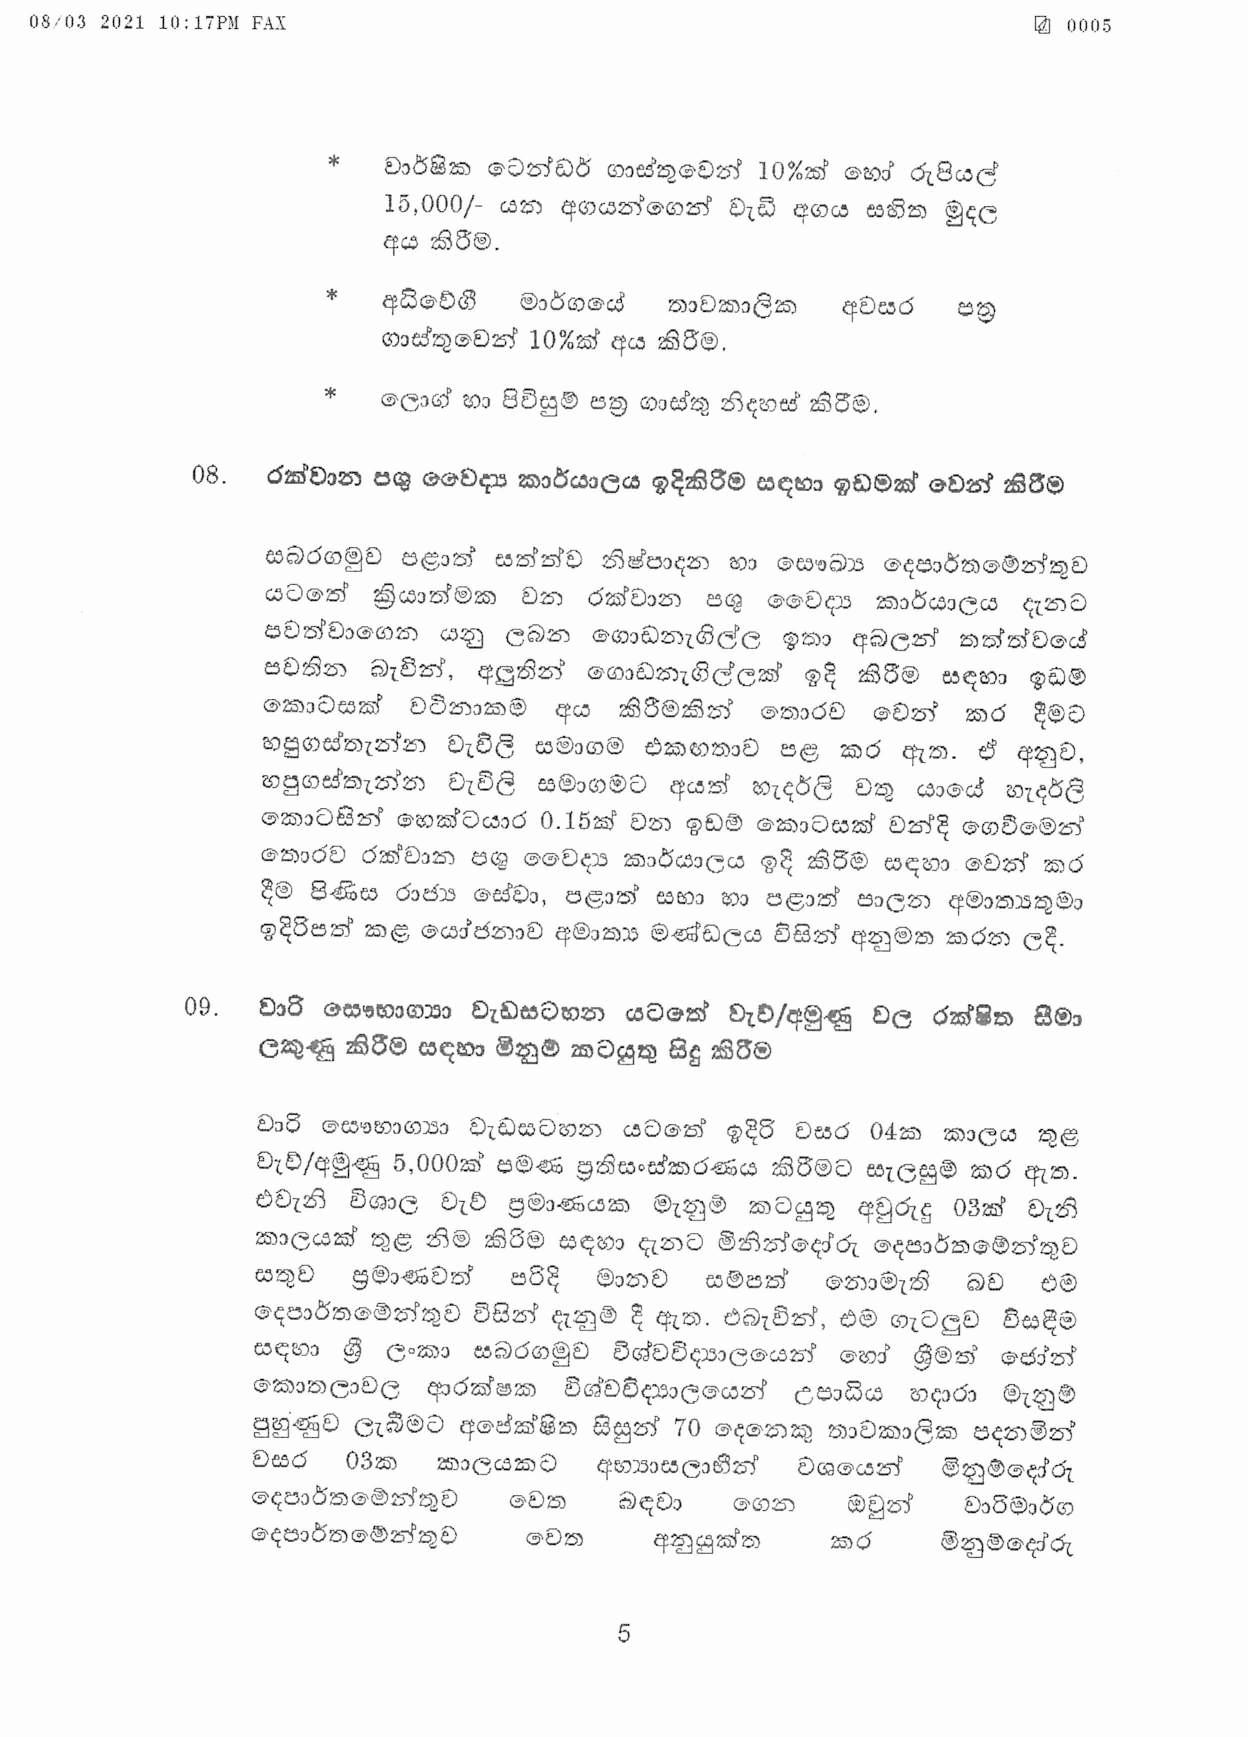 Cabinet Decision on 08.03.2021 compressed page 005